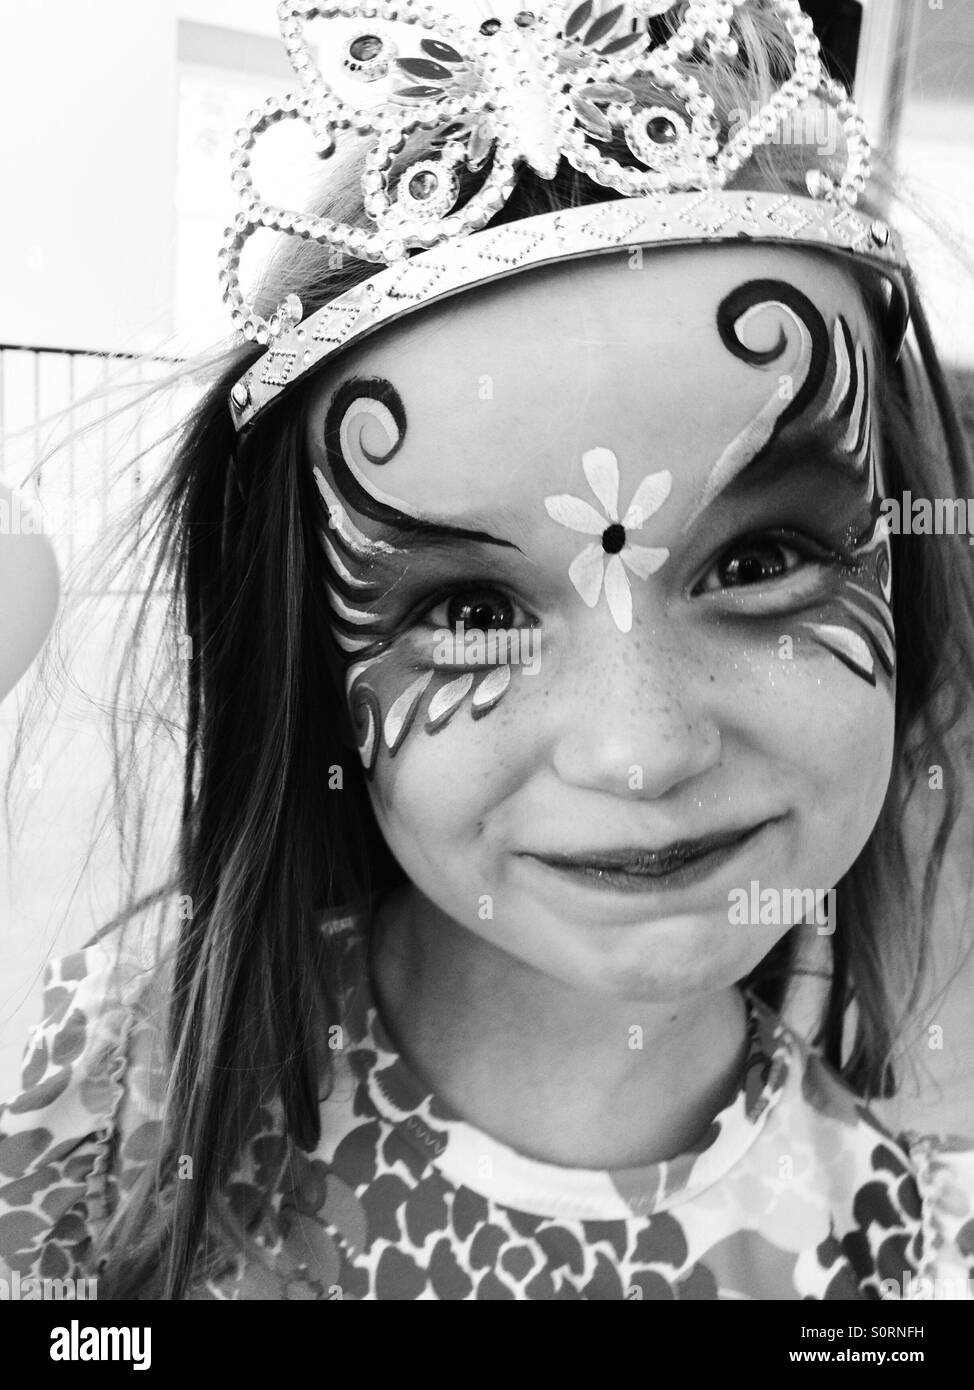 Girl with face paint and tiara Stock Photo